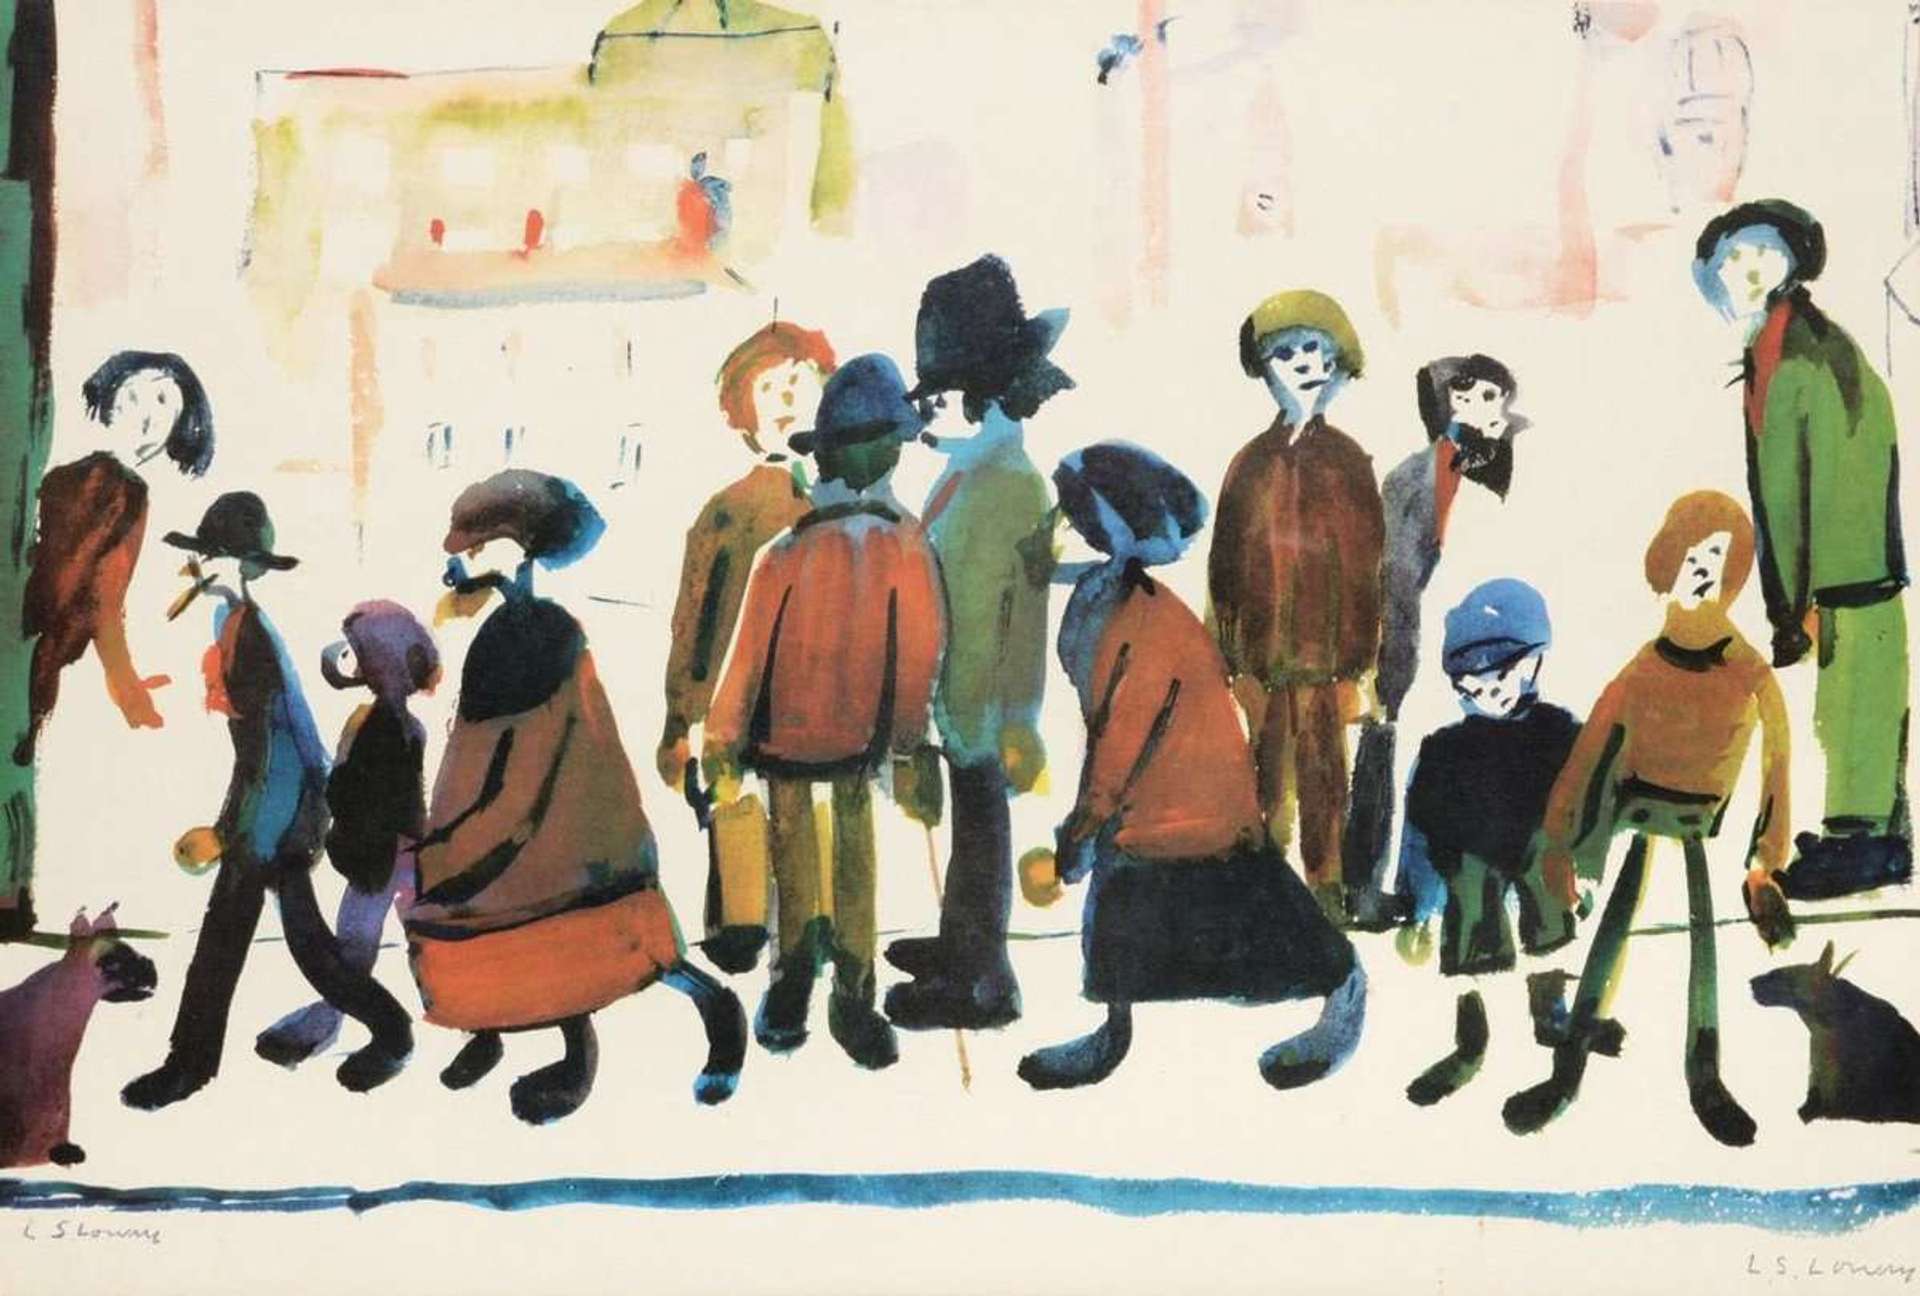 Beyond the Matchstick Men: The Nuances of L. S. Lowry's Artistic Style